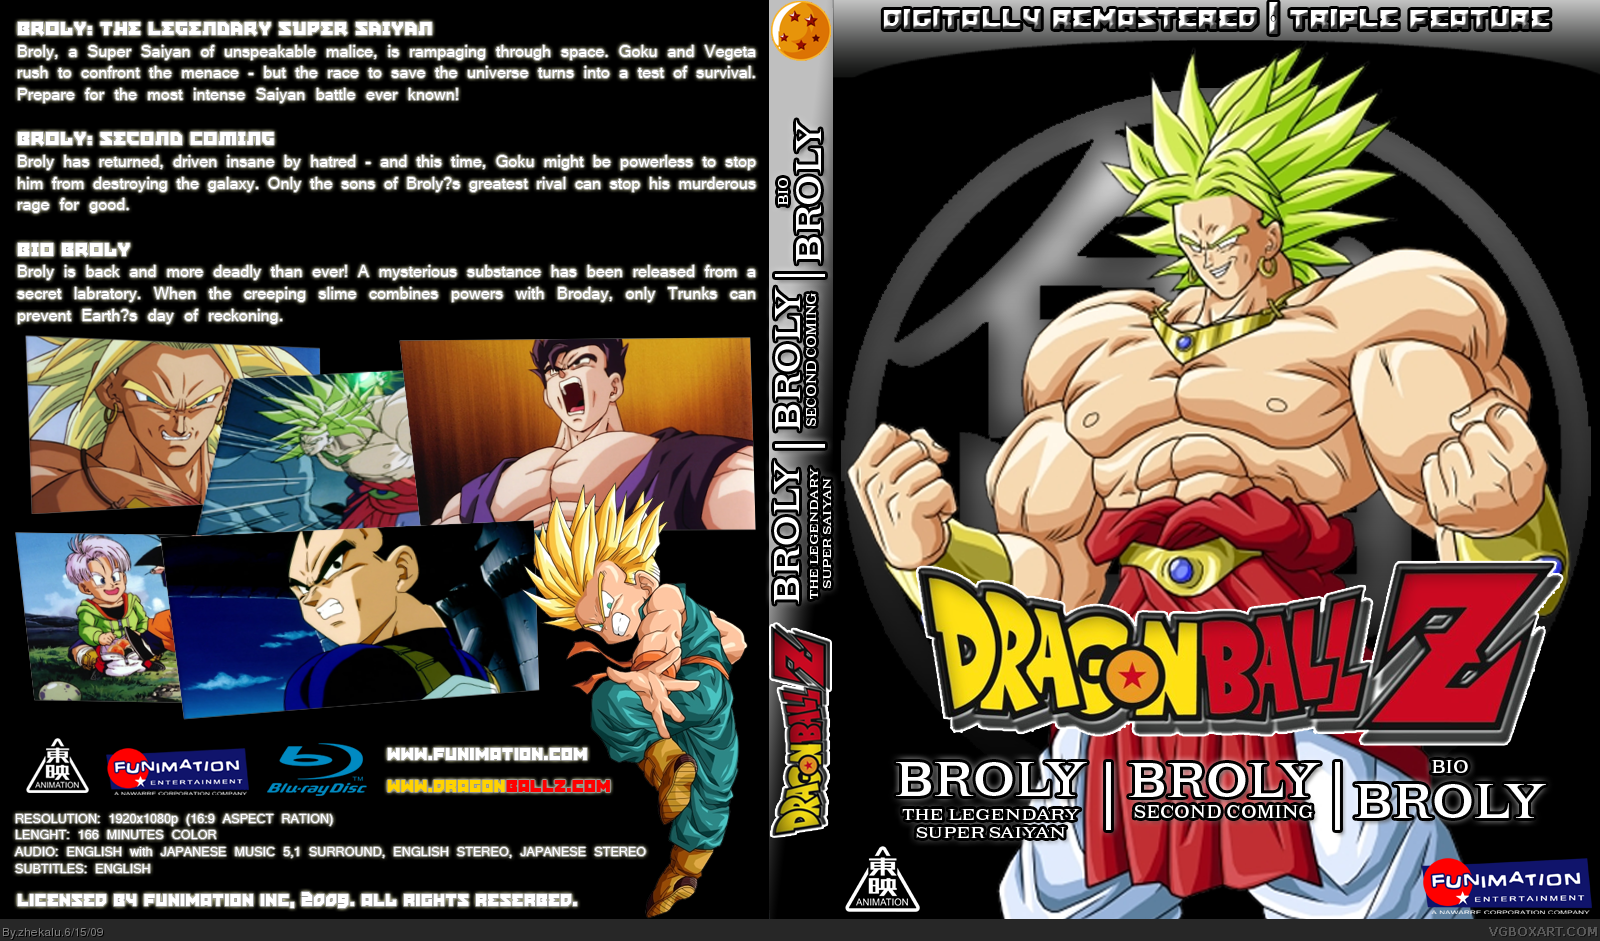 Dragon Ball Z: Broly Triple Feature [Blu-Ray] box cover